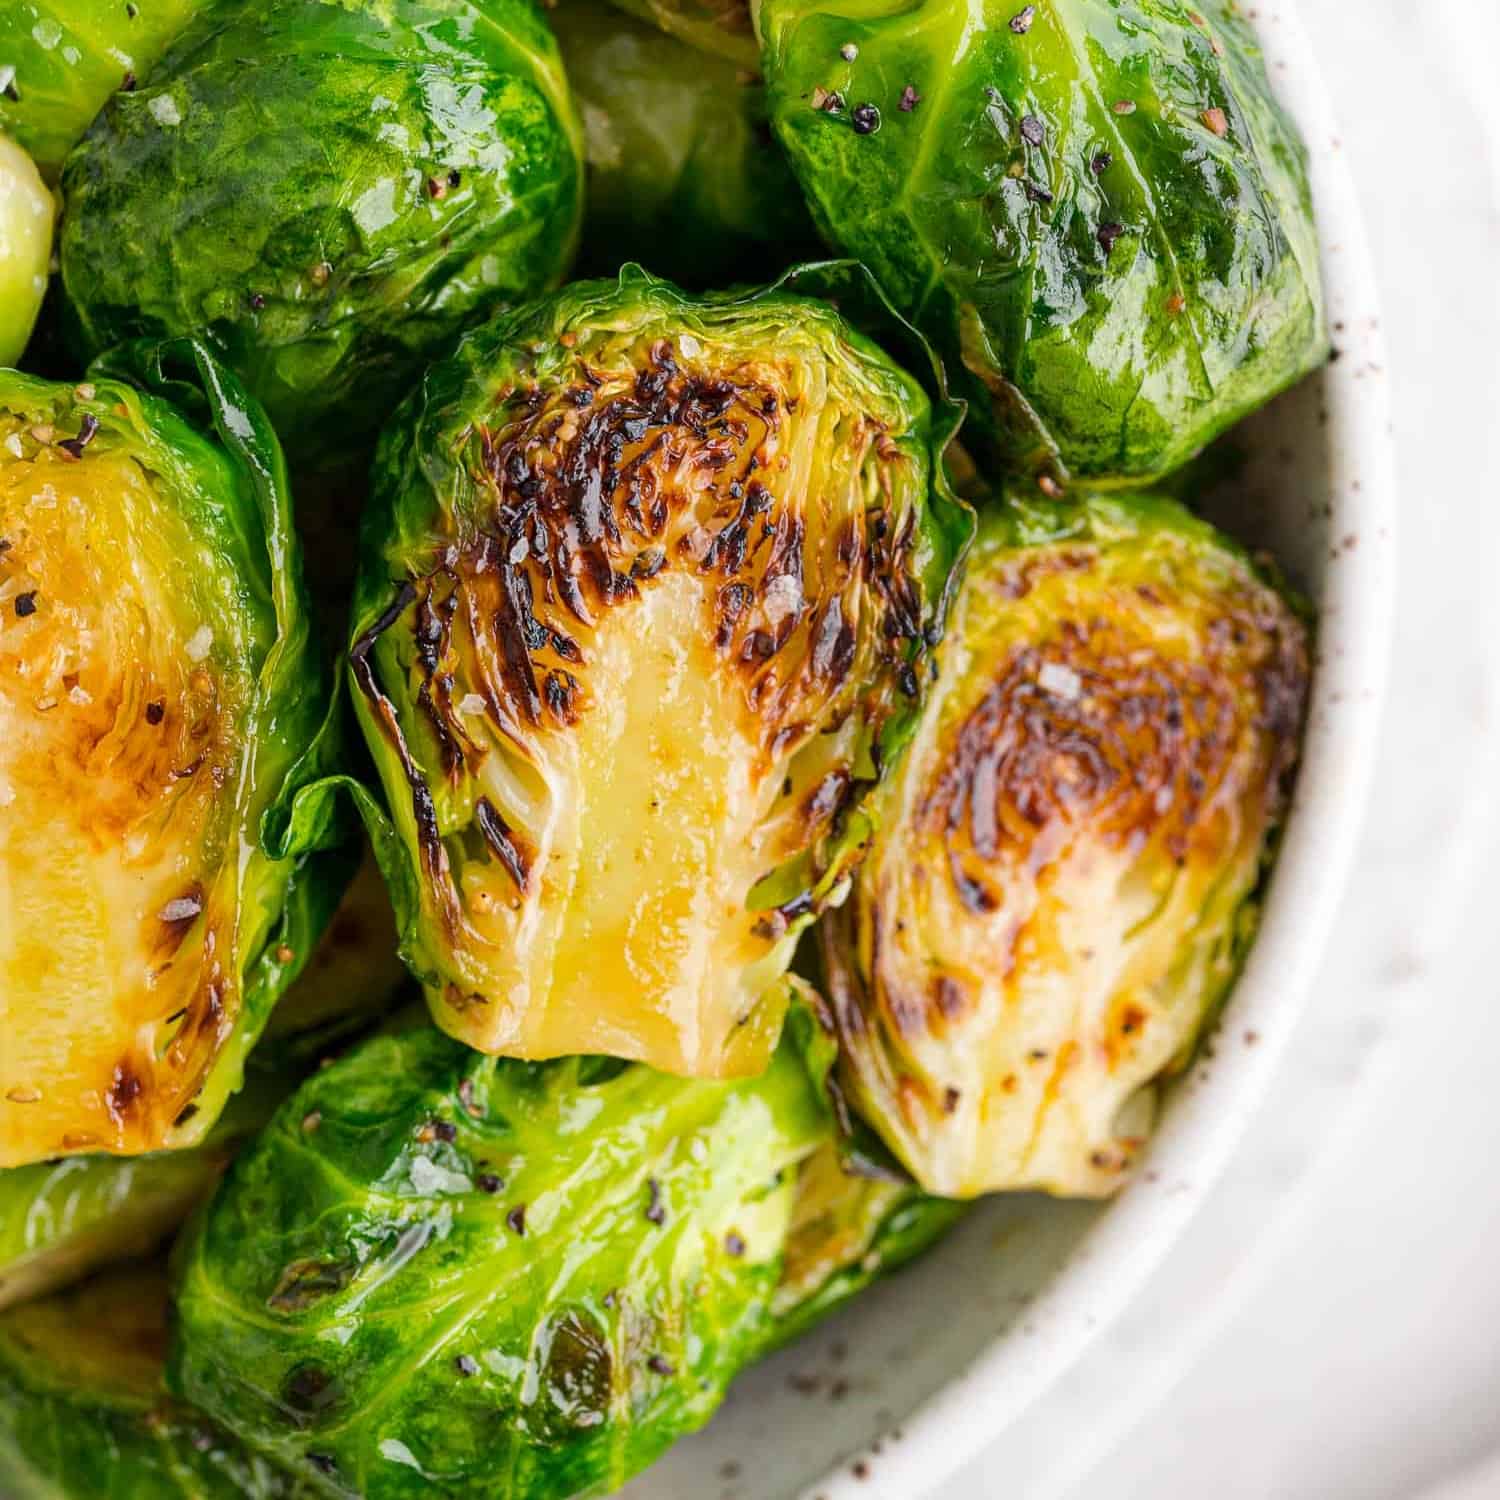 Bacon Bleu Brussels Sprouts With Mustard Sauce